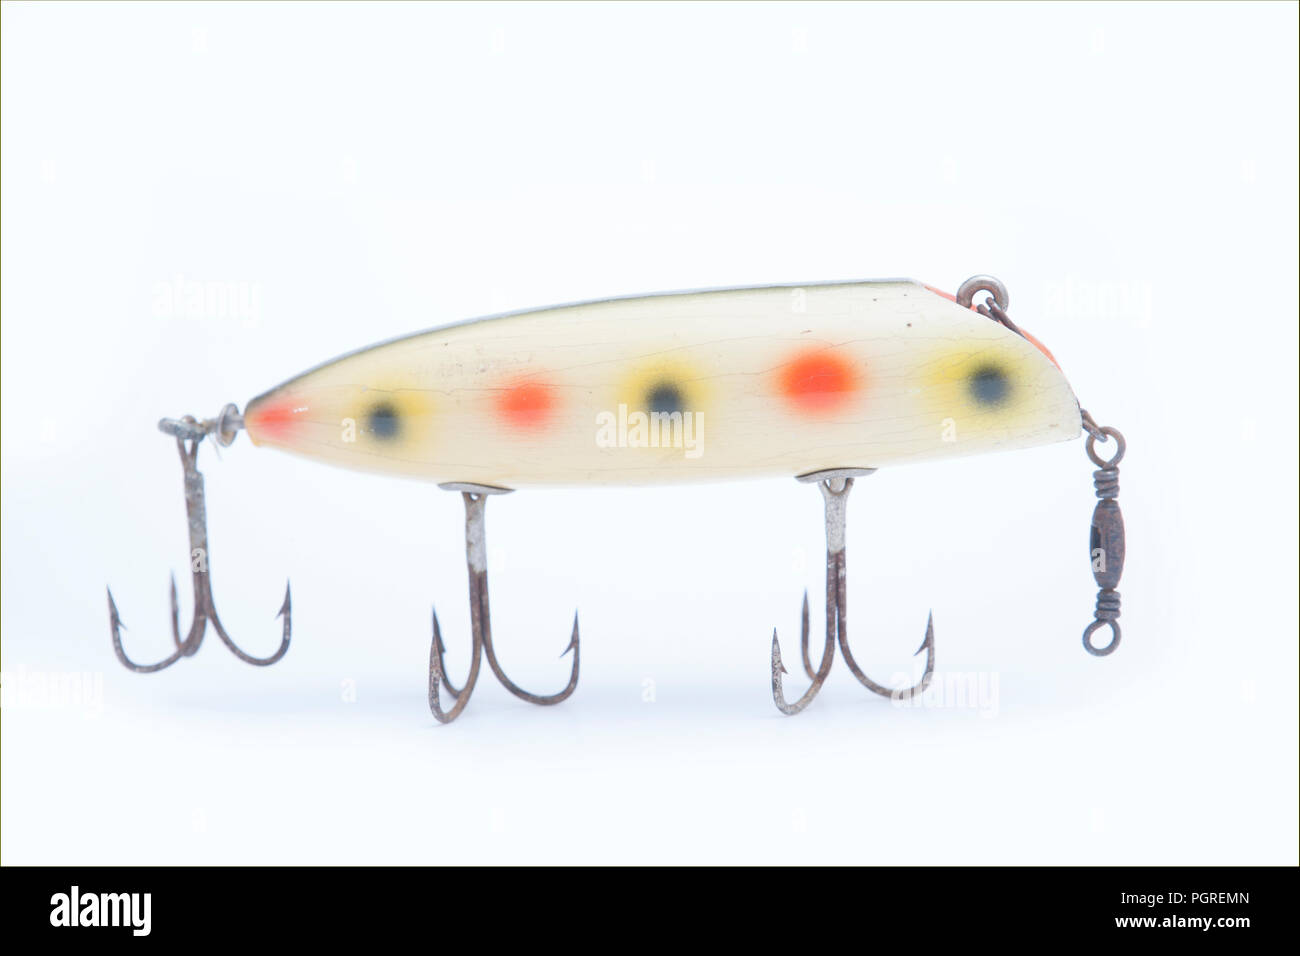 An old fishing lure, or plug, equipped with three treble hooks and designed to dive when reeled in. From a collection of vintage and modern fishing Stock Photo